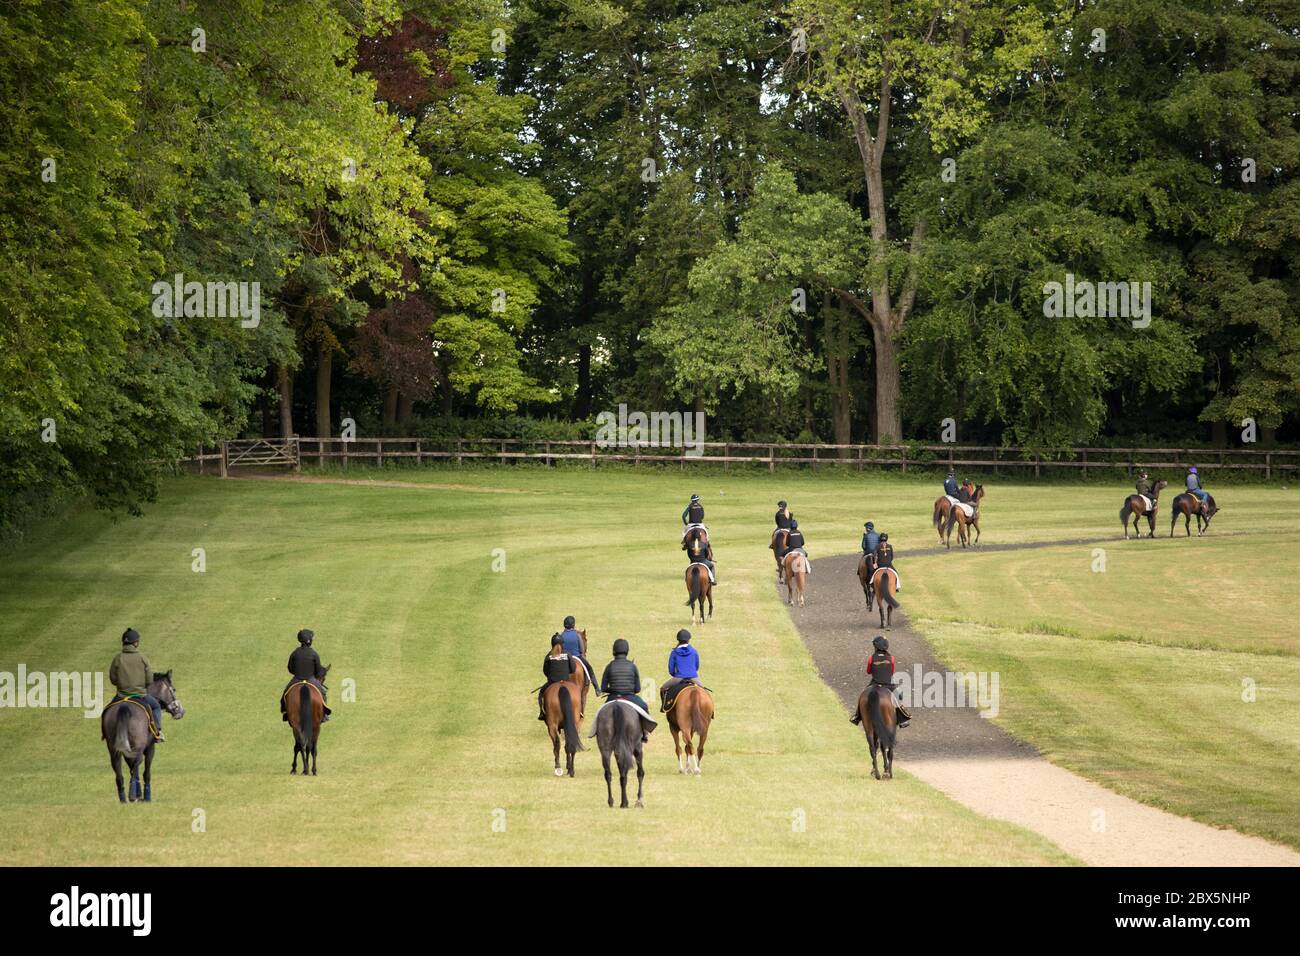 Kingsclere, Hampshire. 5th June, 2020. Riders and their horses return to the stables after training on the gallops, at the Kingsclere Park House Stables, which are run by horse racing trainer Andrew Balding, in Hampshire, Britain on June 5, 2020. Horse racing behind closed doors has resumed gradually in Britain after the government eased some lockdown restrictions. Racing is taking place behind closed doors with strict measures taken to prevent the spread of coronavirus. Credit: Tim Ireland/Xinhua/Alamy Live News Stock Photo